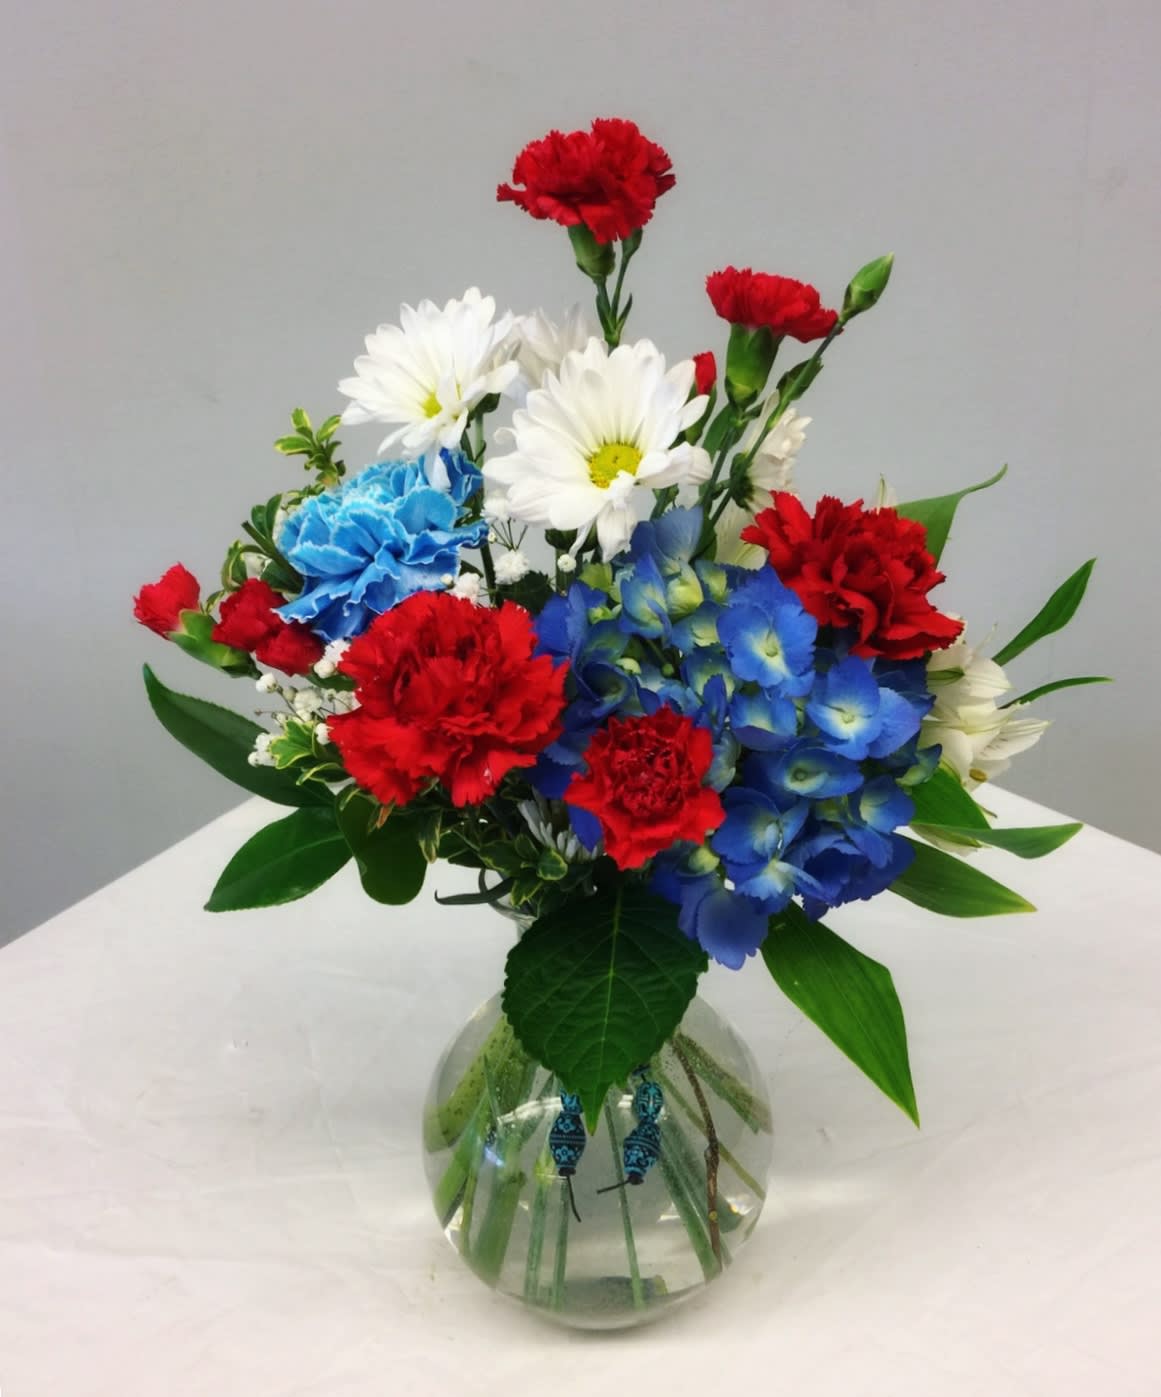 Bold in Blue - This festive red, white and blue bouquet is perfect for the season. Limited supplies. Don’t miss out! 